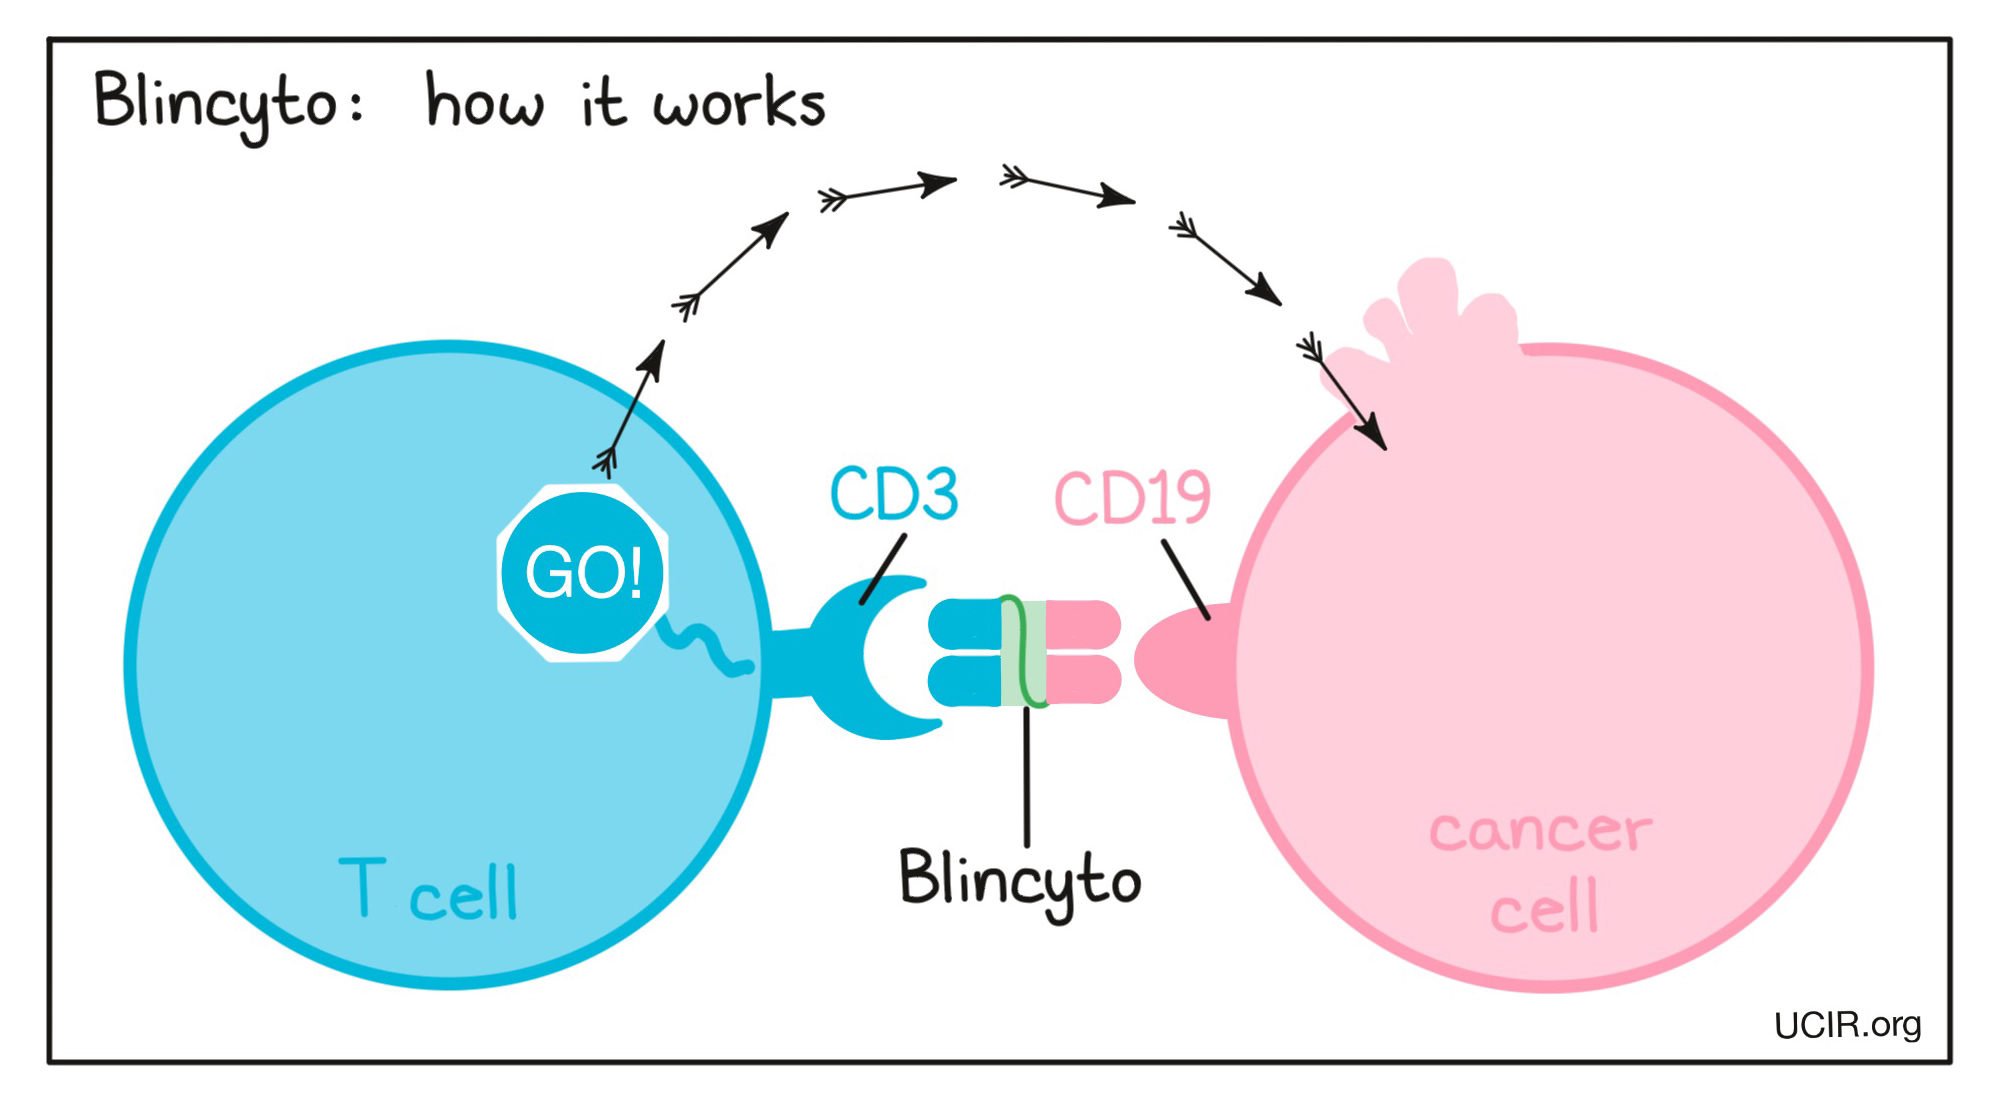 Illustration that shows how Blincyto works